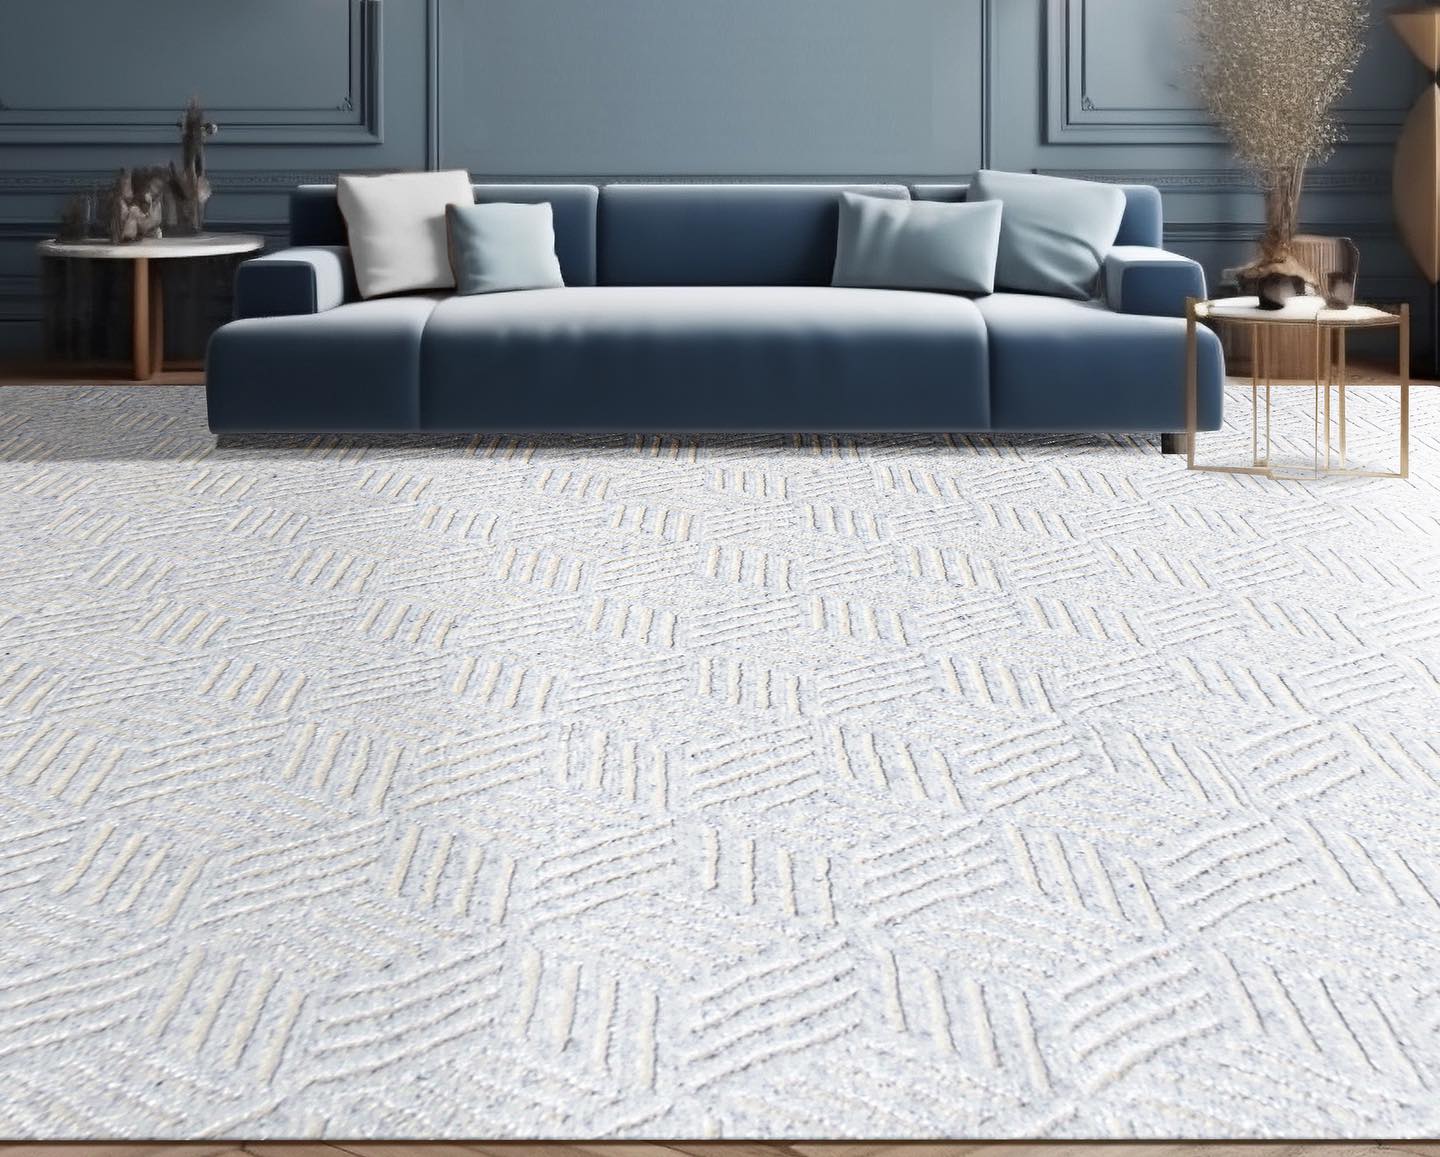 A contemporary grey rug with white geometric patterns, adding a stylish touch to any space.